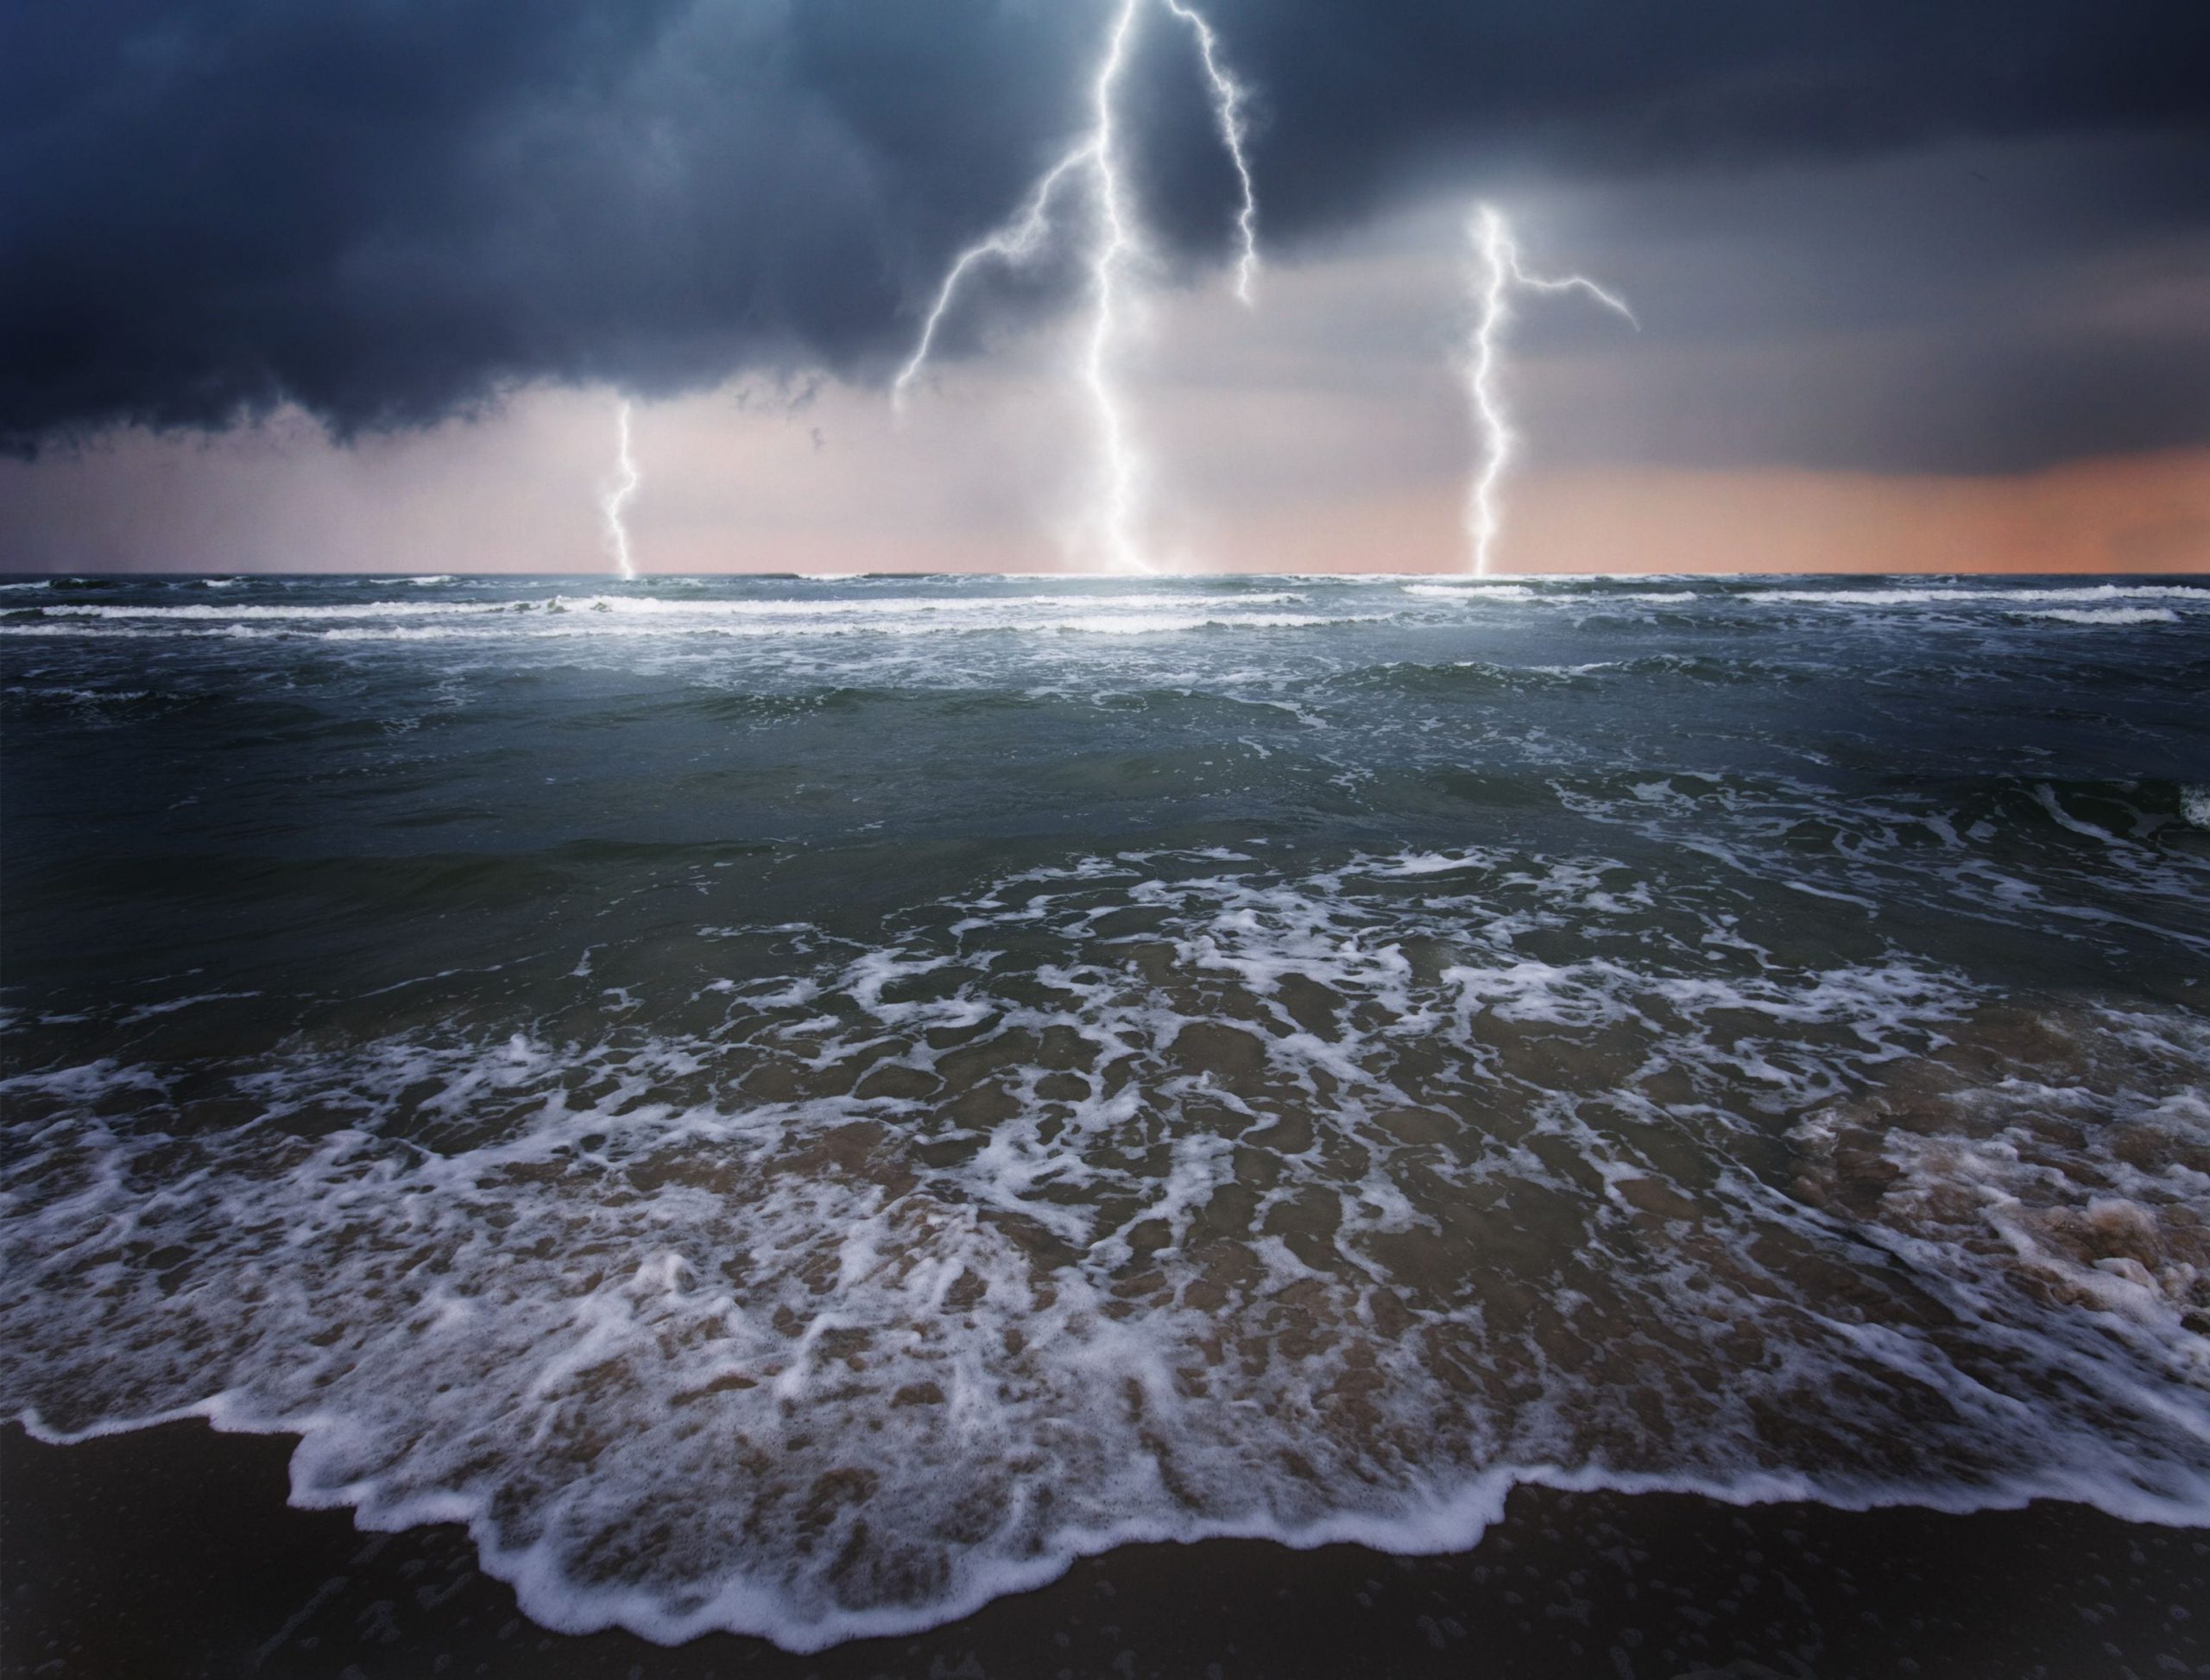 Lightning strikes on the ocean viewing from the beach